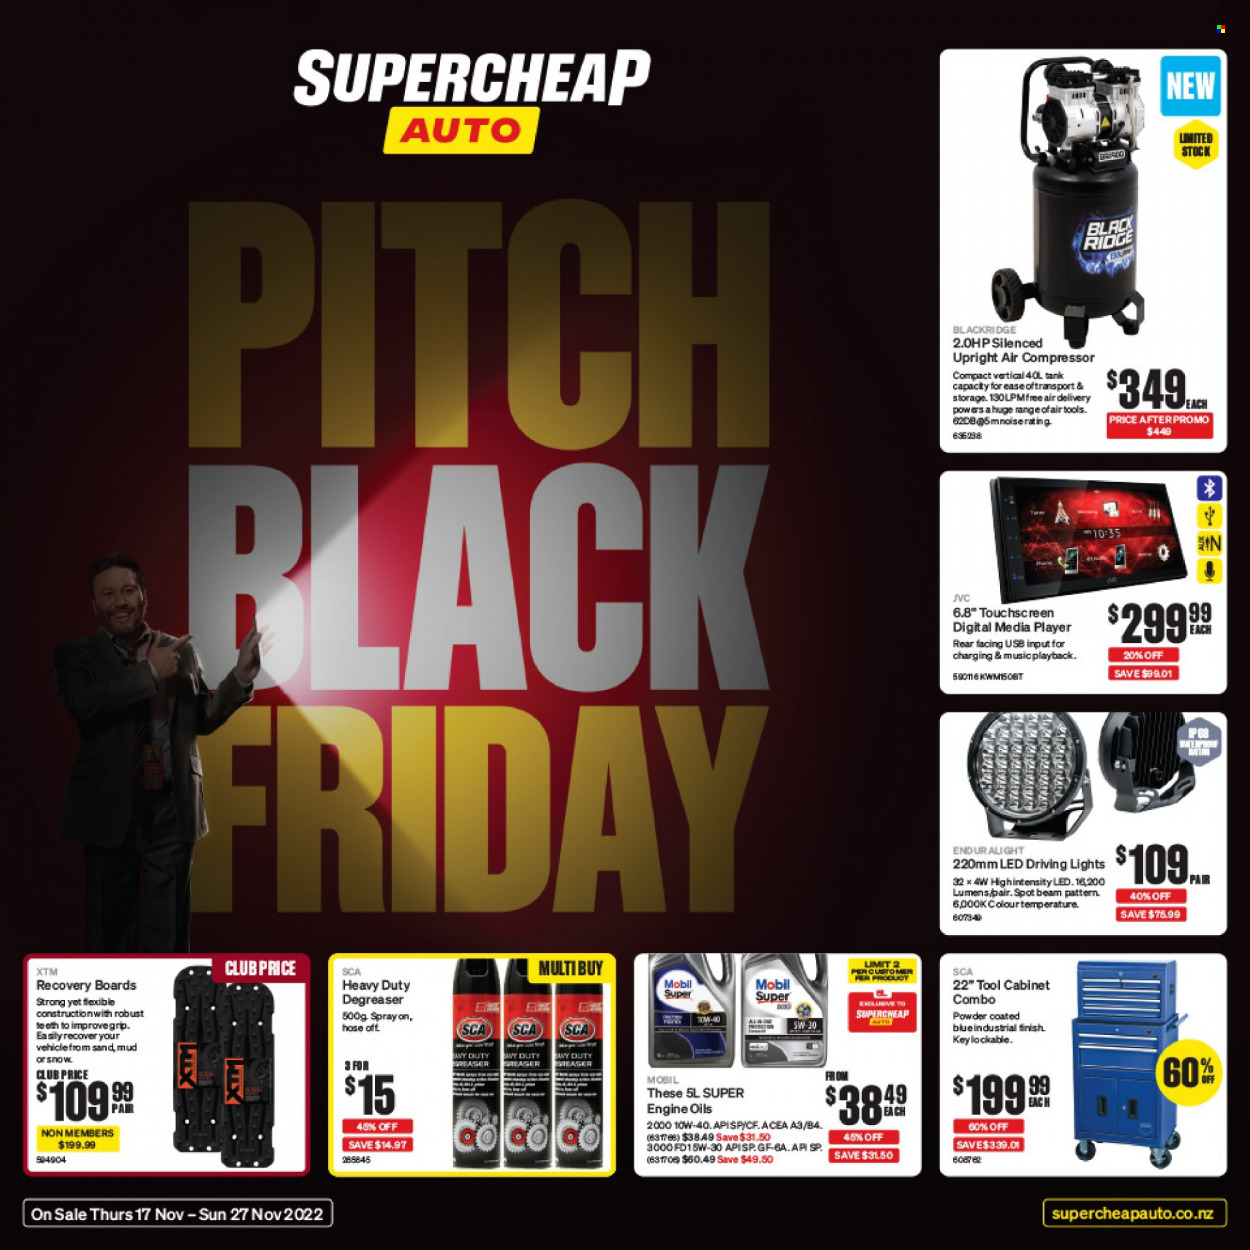 thumbnail - SuperCheap Auto mailer - 17.11.2022 - 27.11.2022 - Sales products - JVC, media player, XTM, air compressor, cabinet, tool cabinets, tank, recovery boards, driving lights, degreaser, Mobil. Page 1.